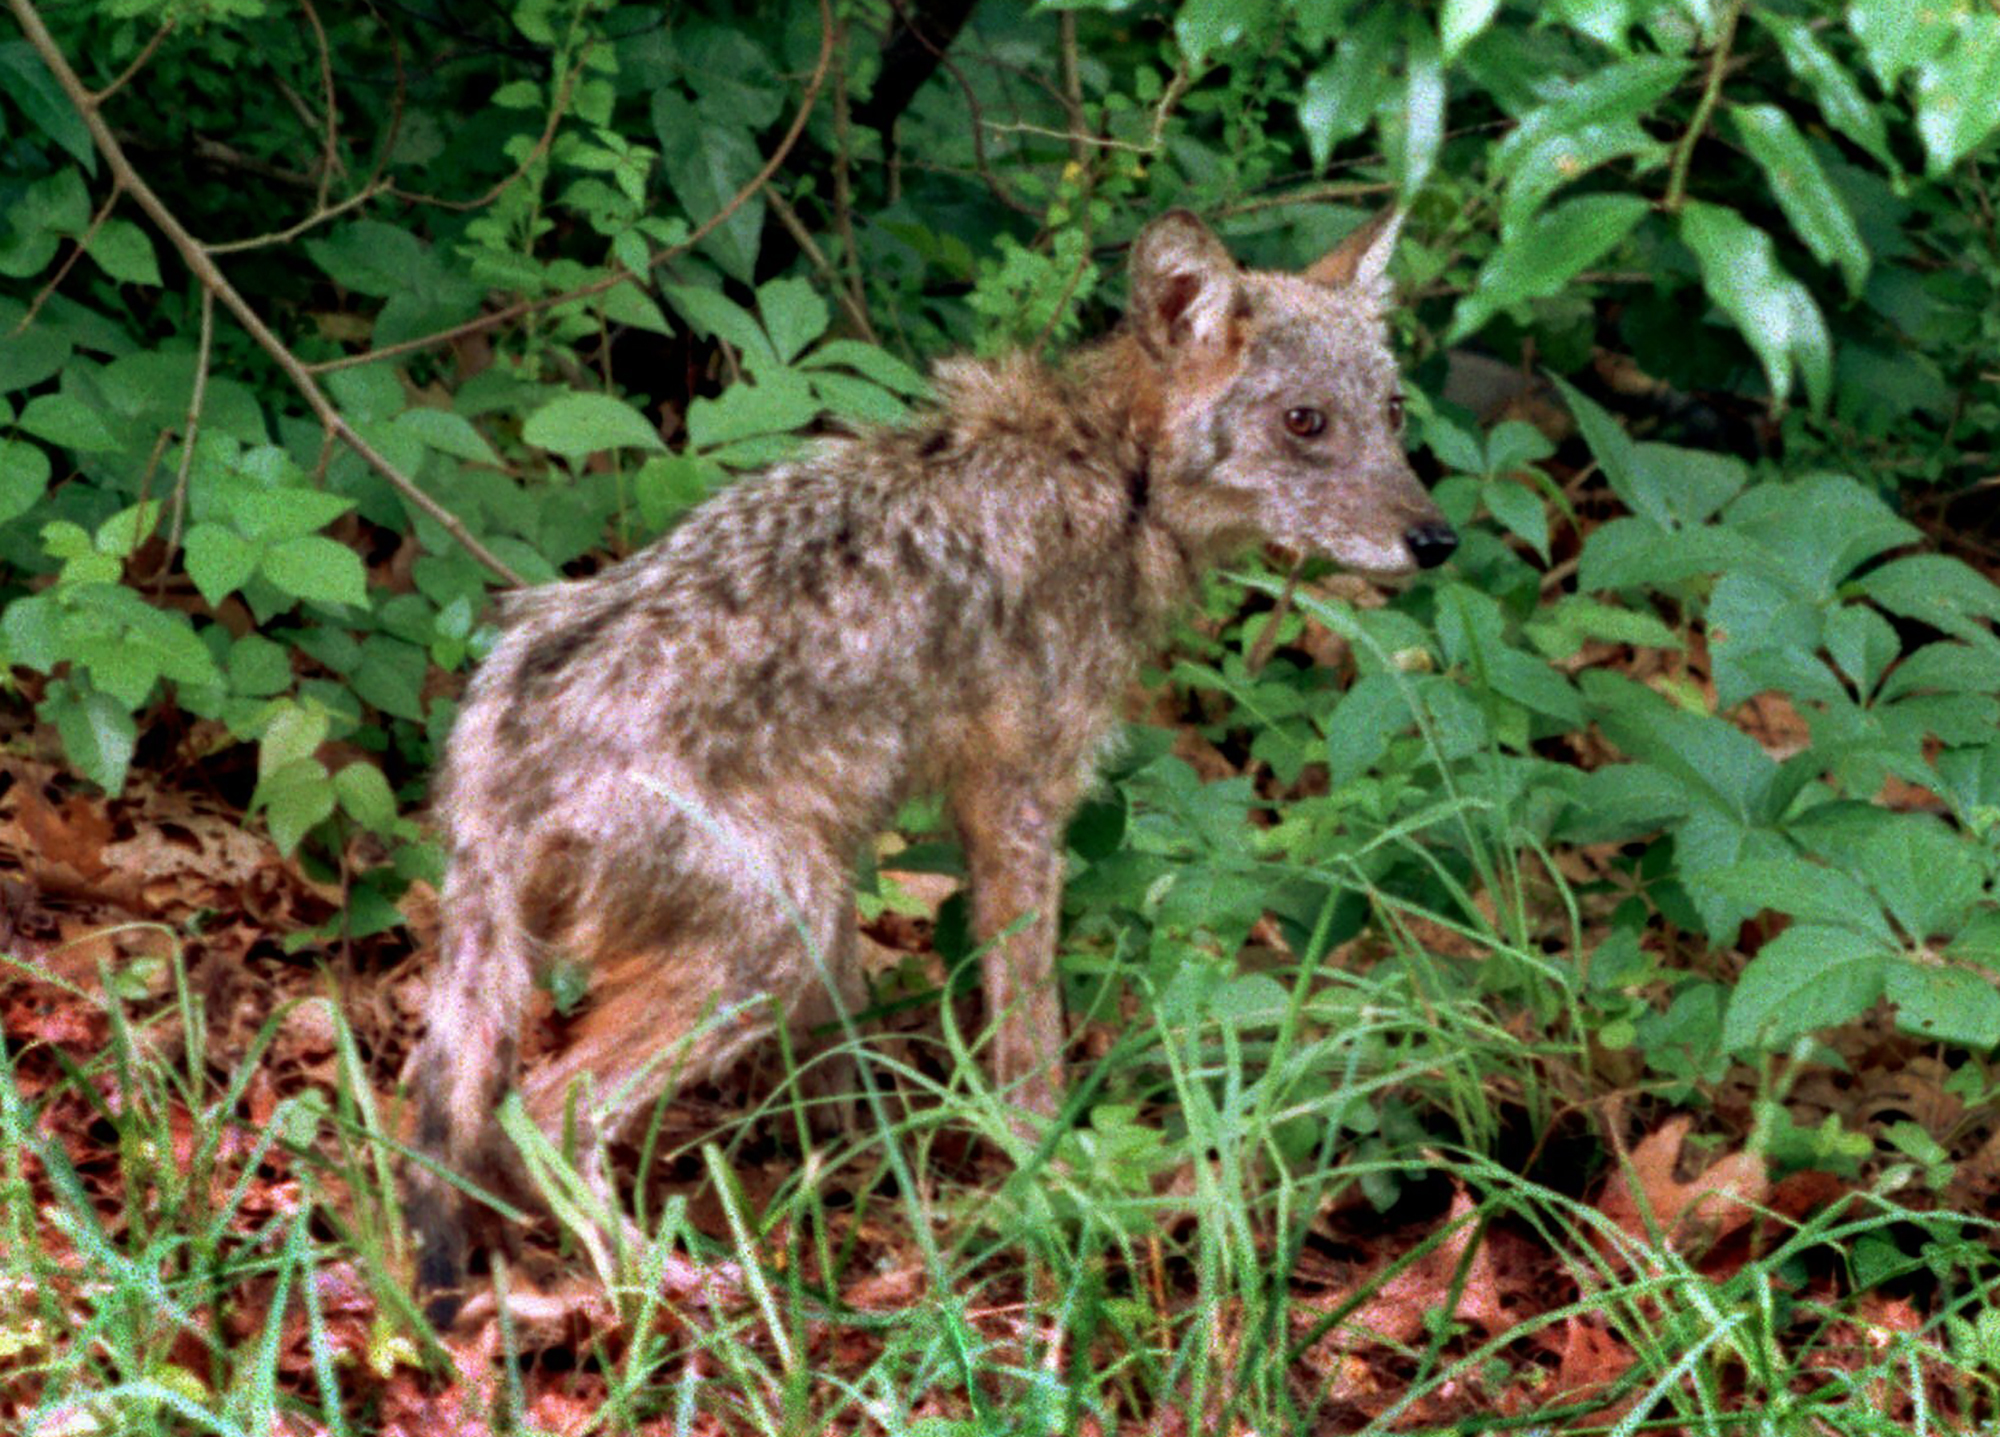 How to Coexist With Coyotes and Keep Pets Safe